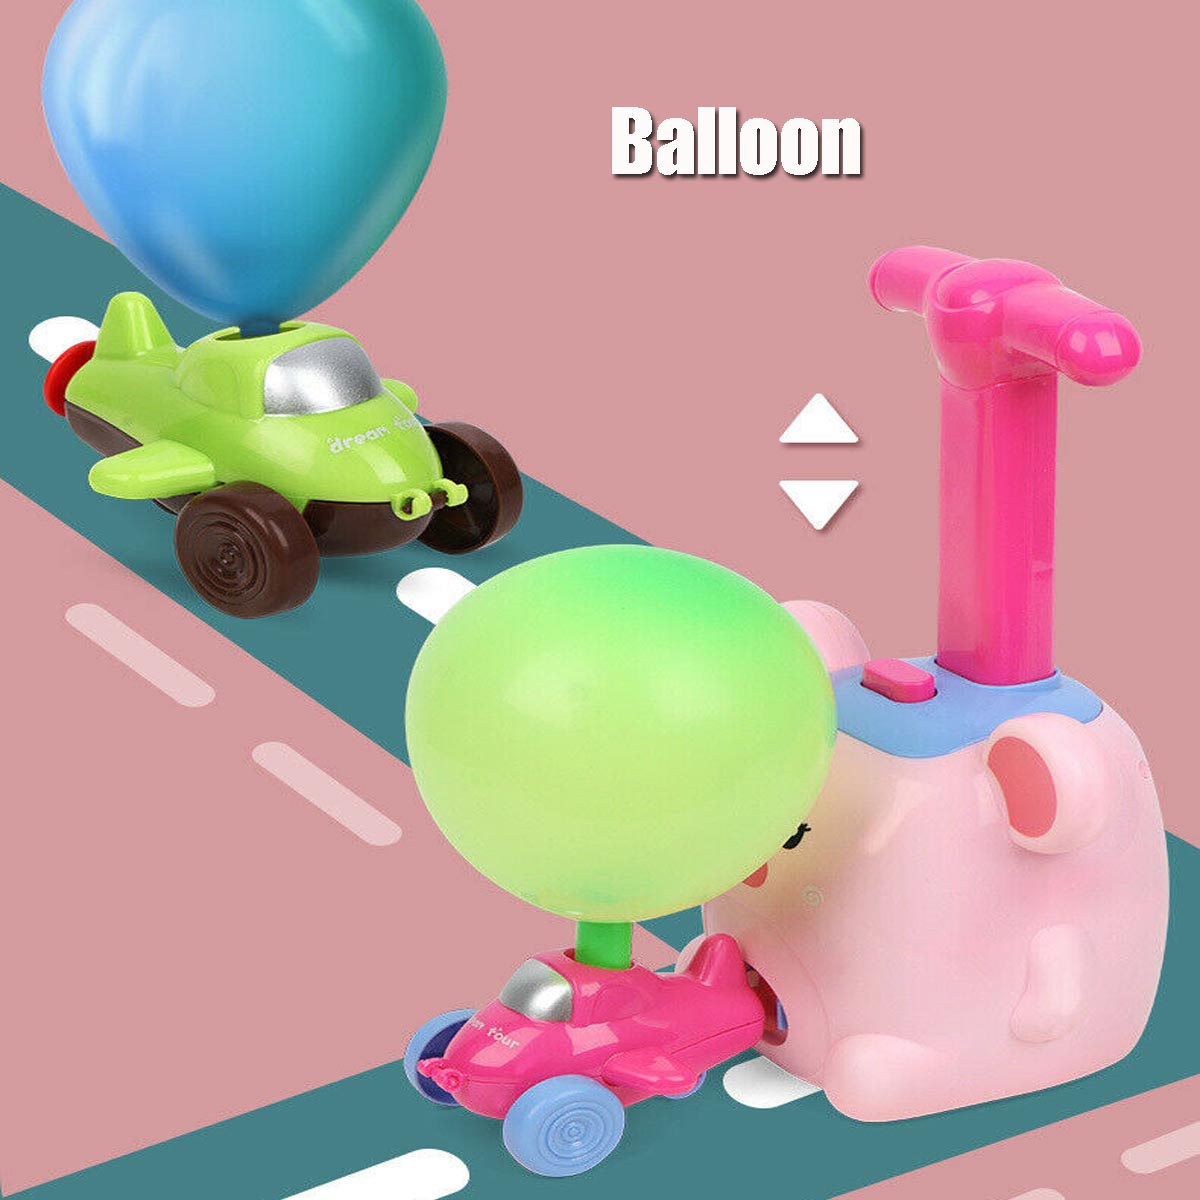 Inertia-Balloon-Launcher--Powered-Car-Toy-Set-Toys-Game-Gift-For-Kid-Experiment-1830390-4